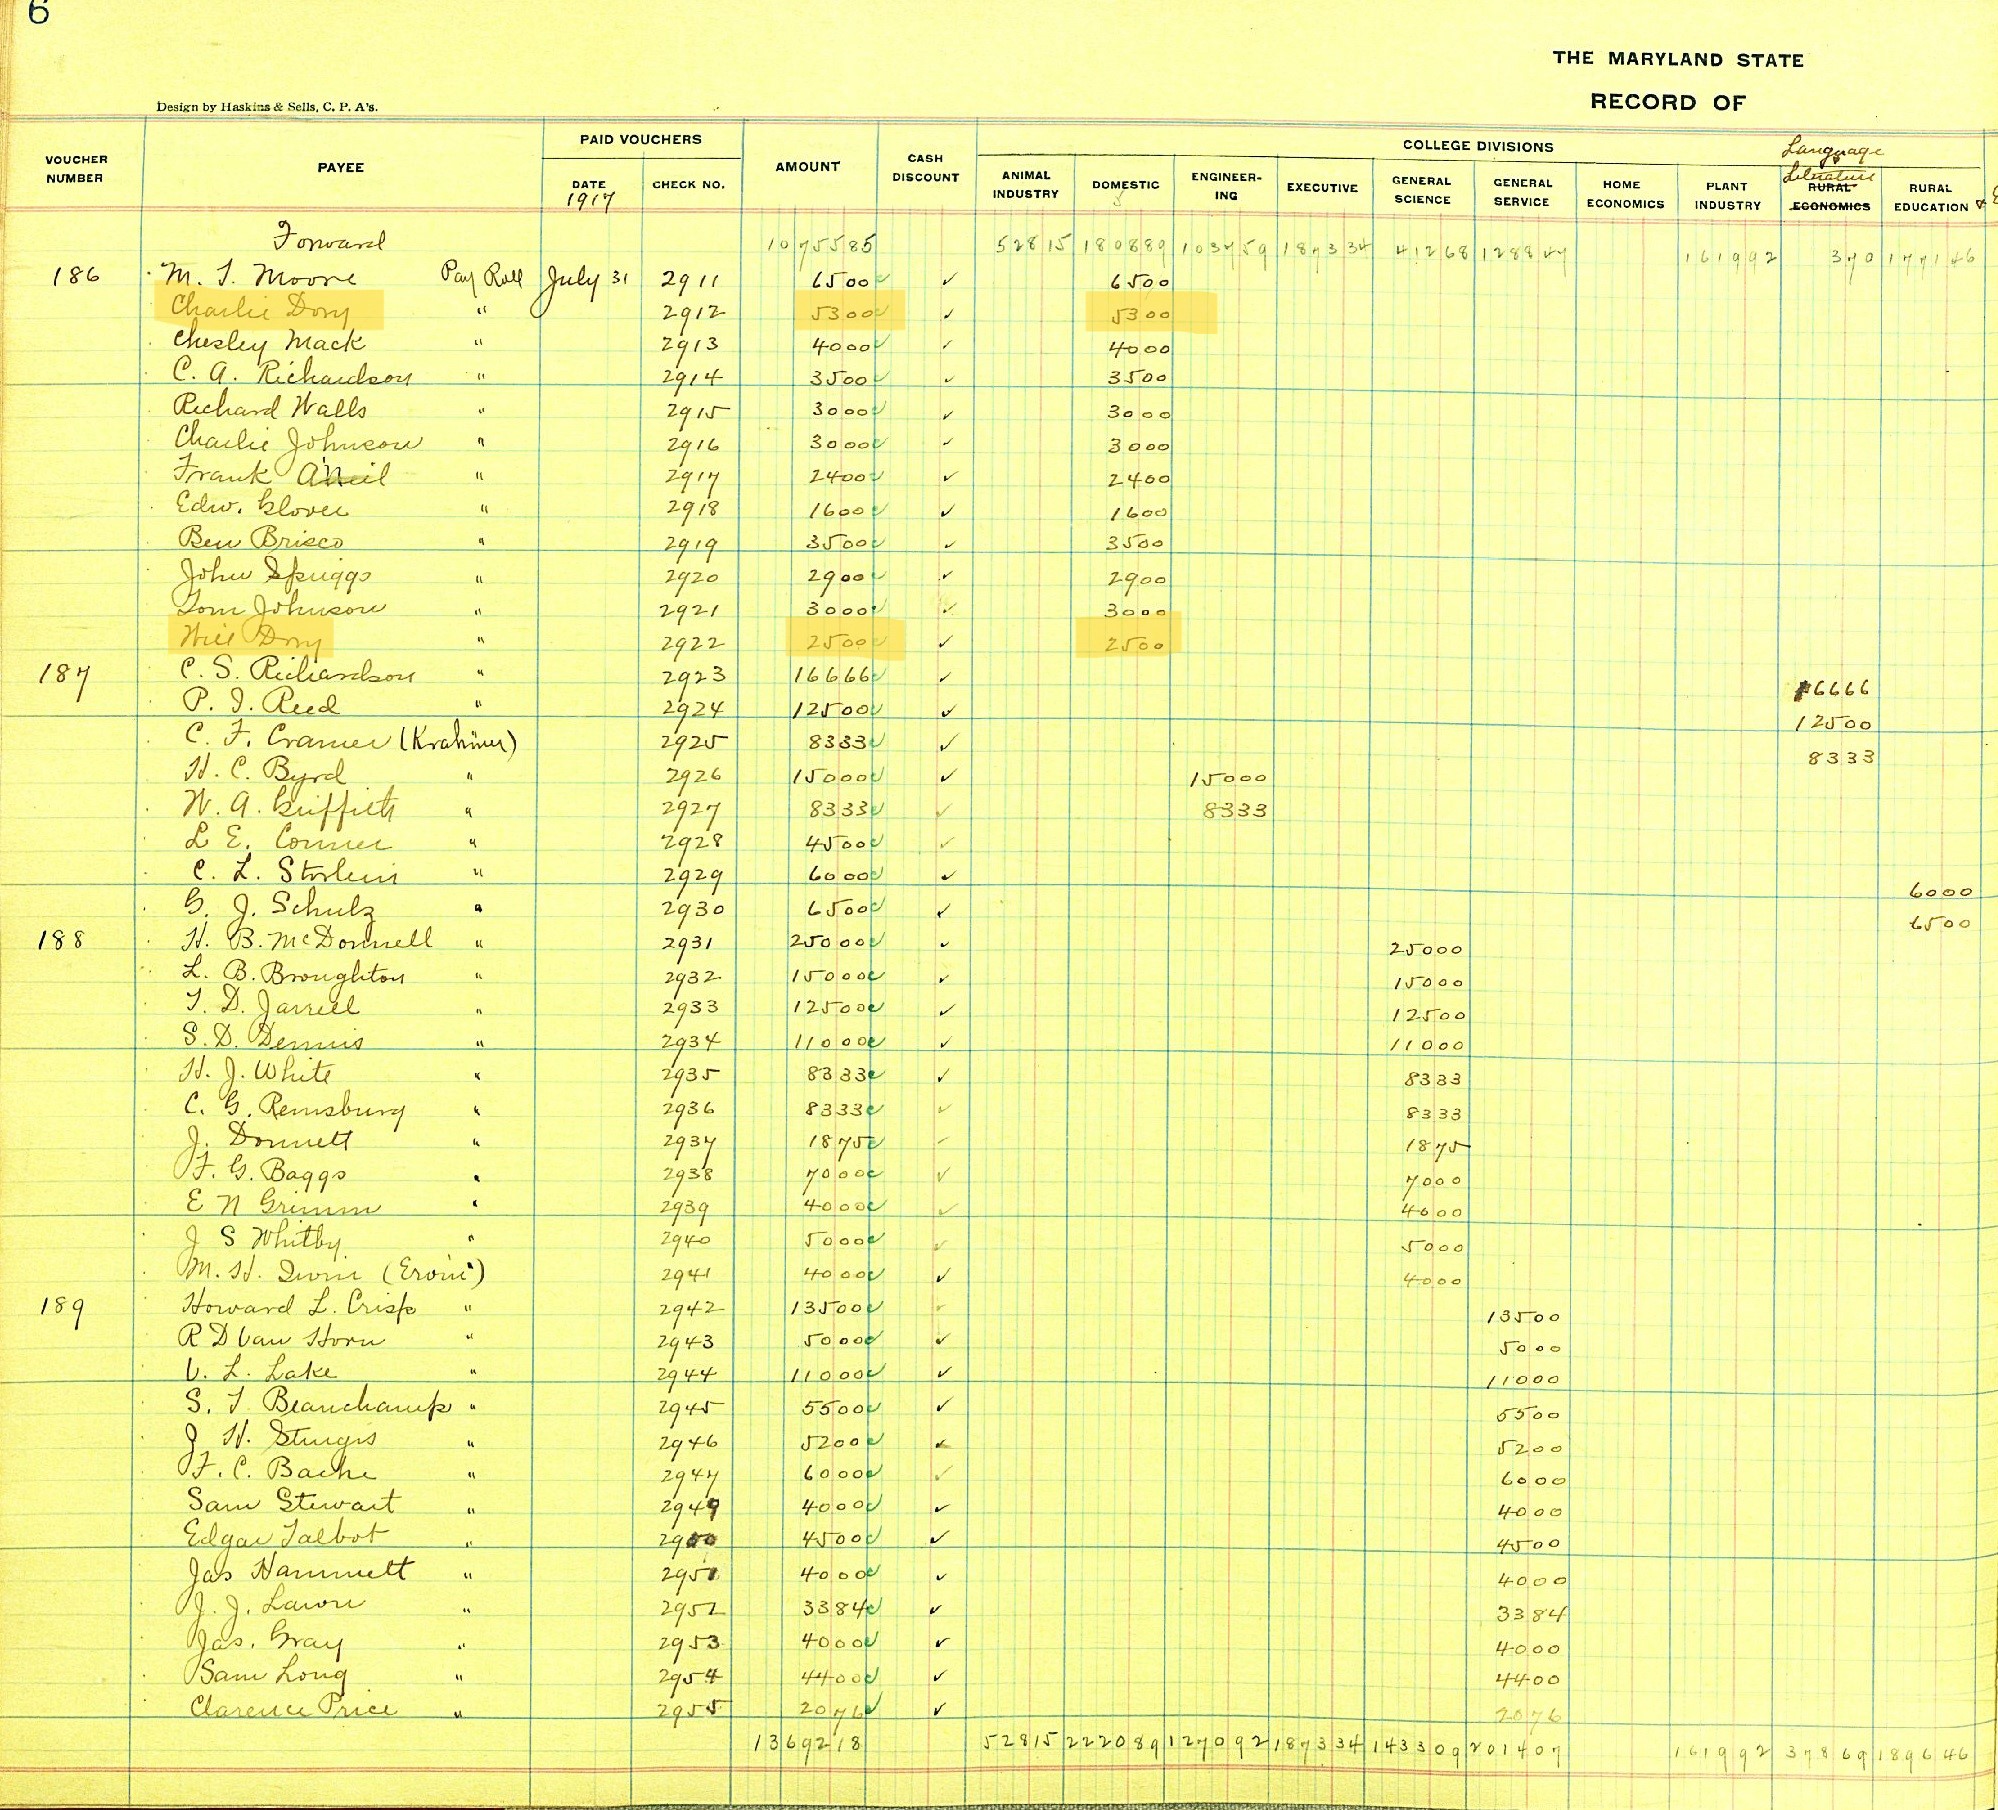 yellow ledger page from 1917 showing entries for labor payments made to individuals; two Dorys are highlighted